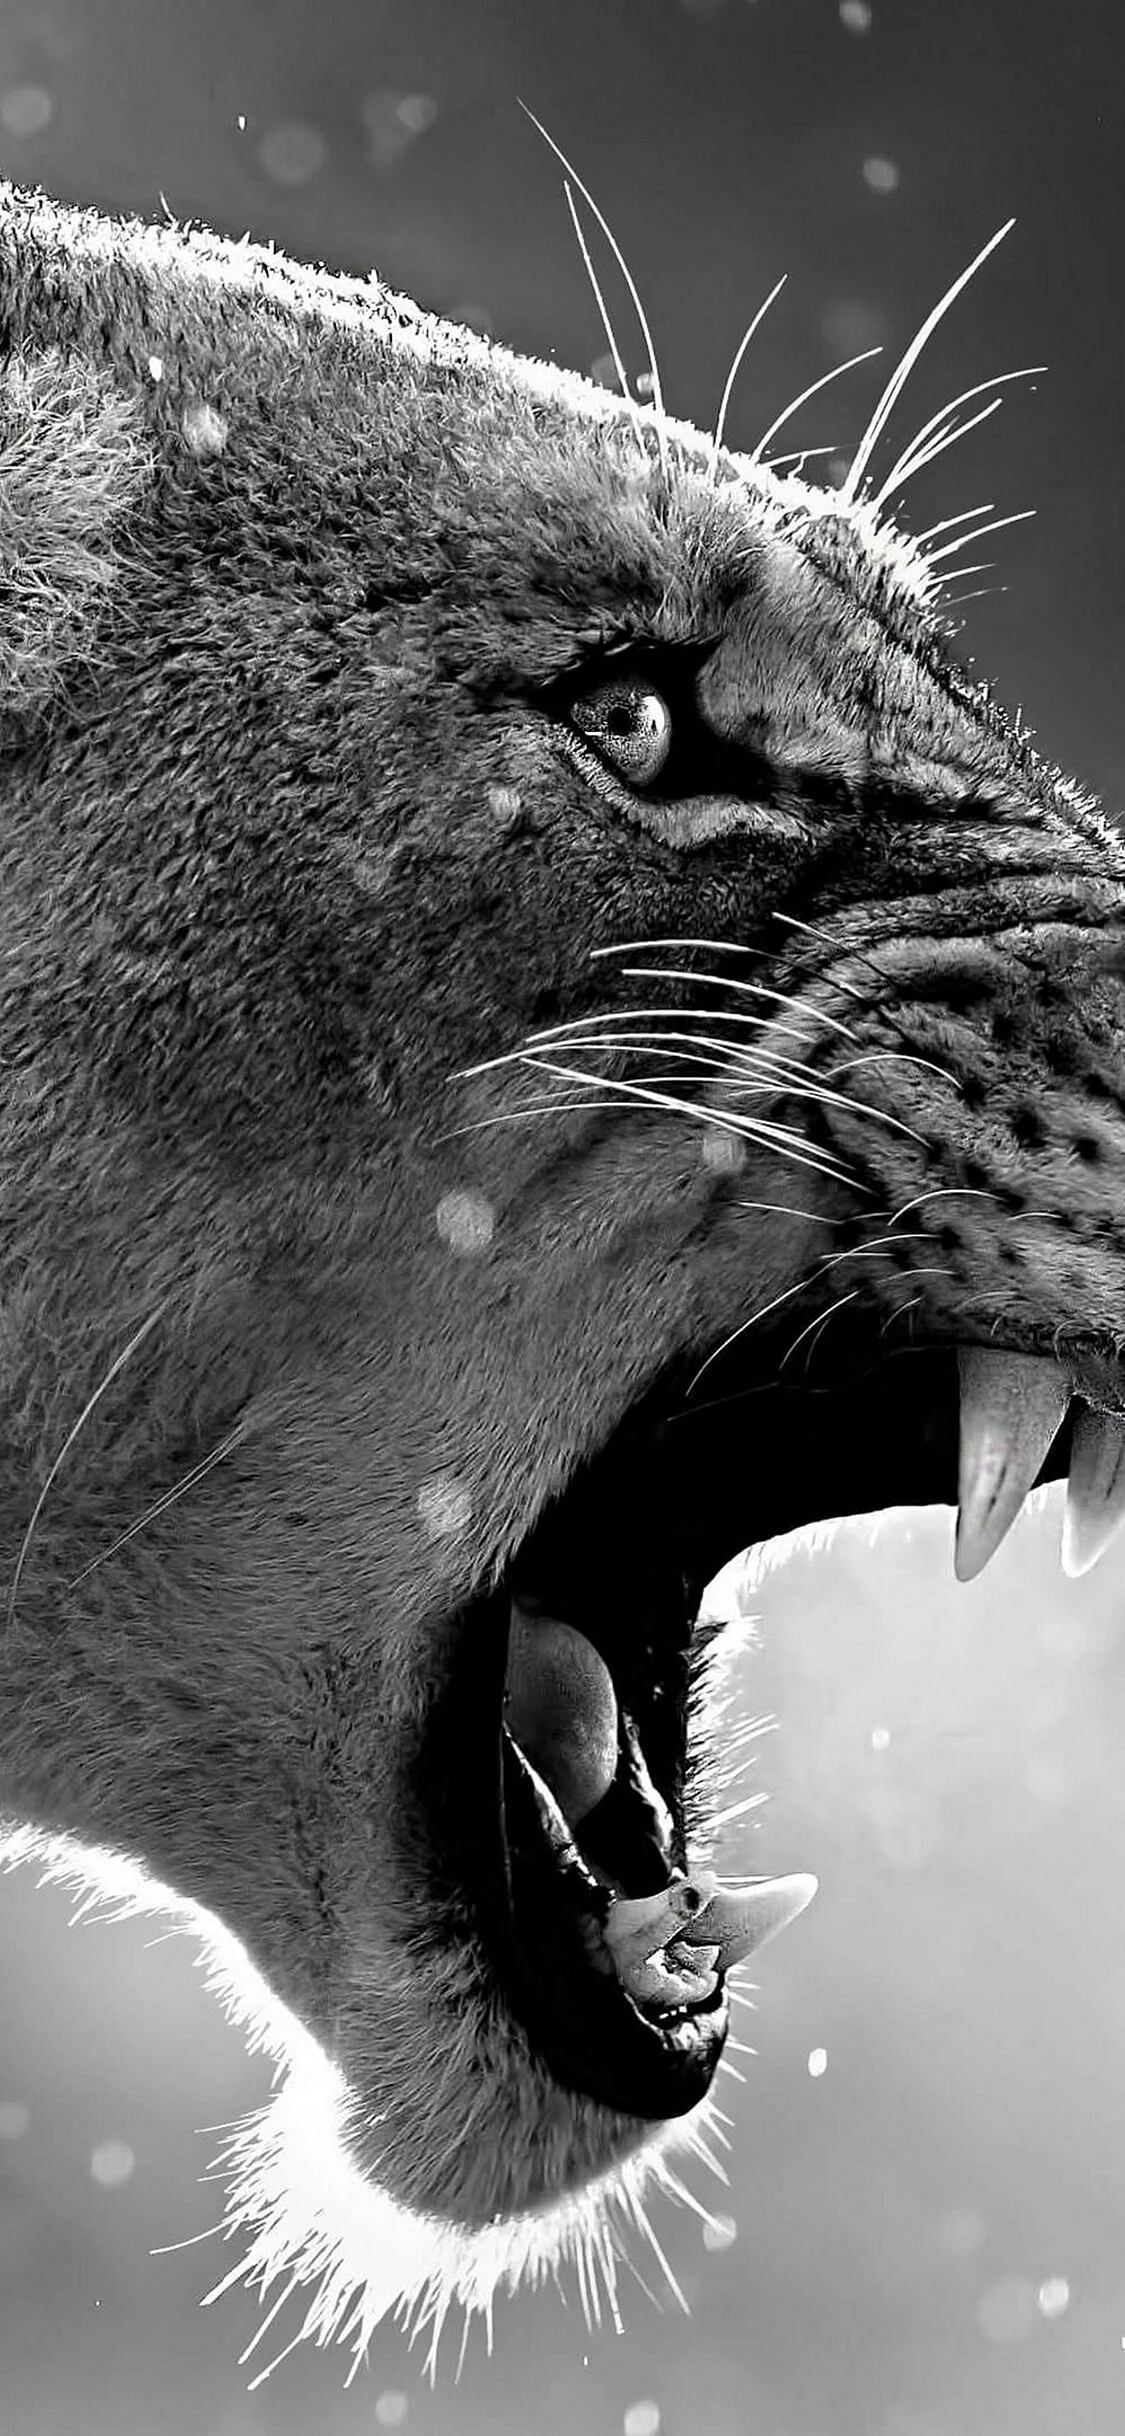 Lion Angry Wallpaper for iPhone 11 Pro